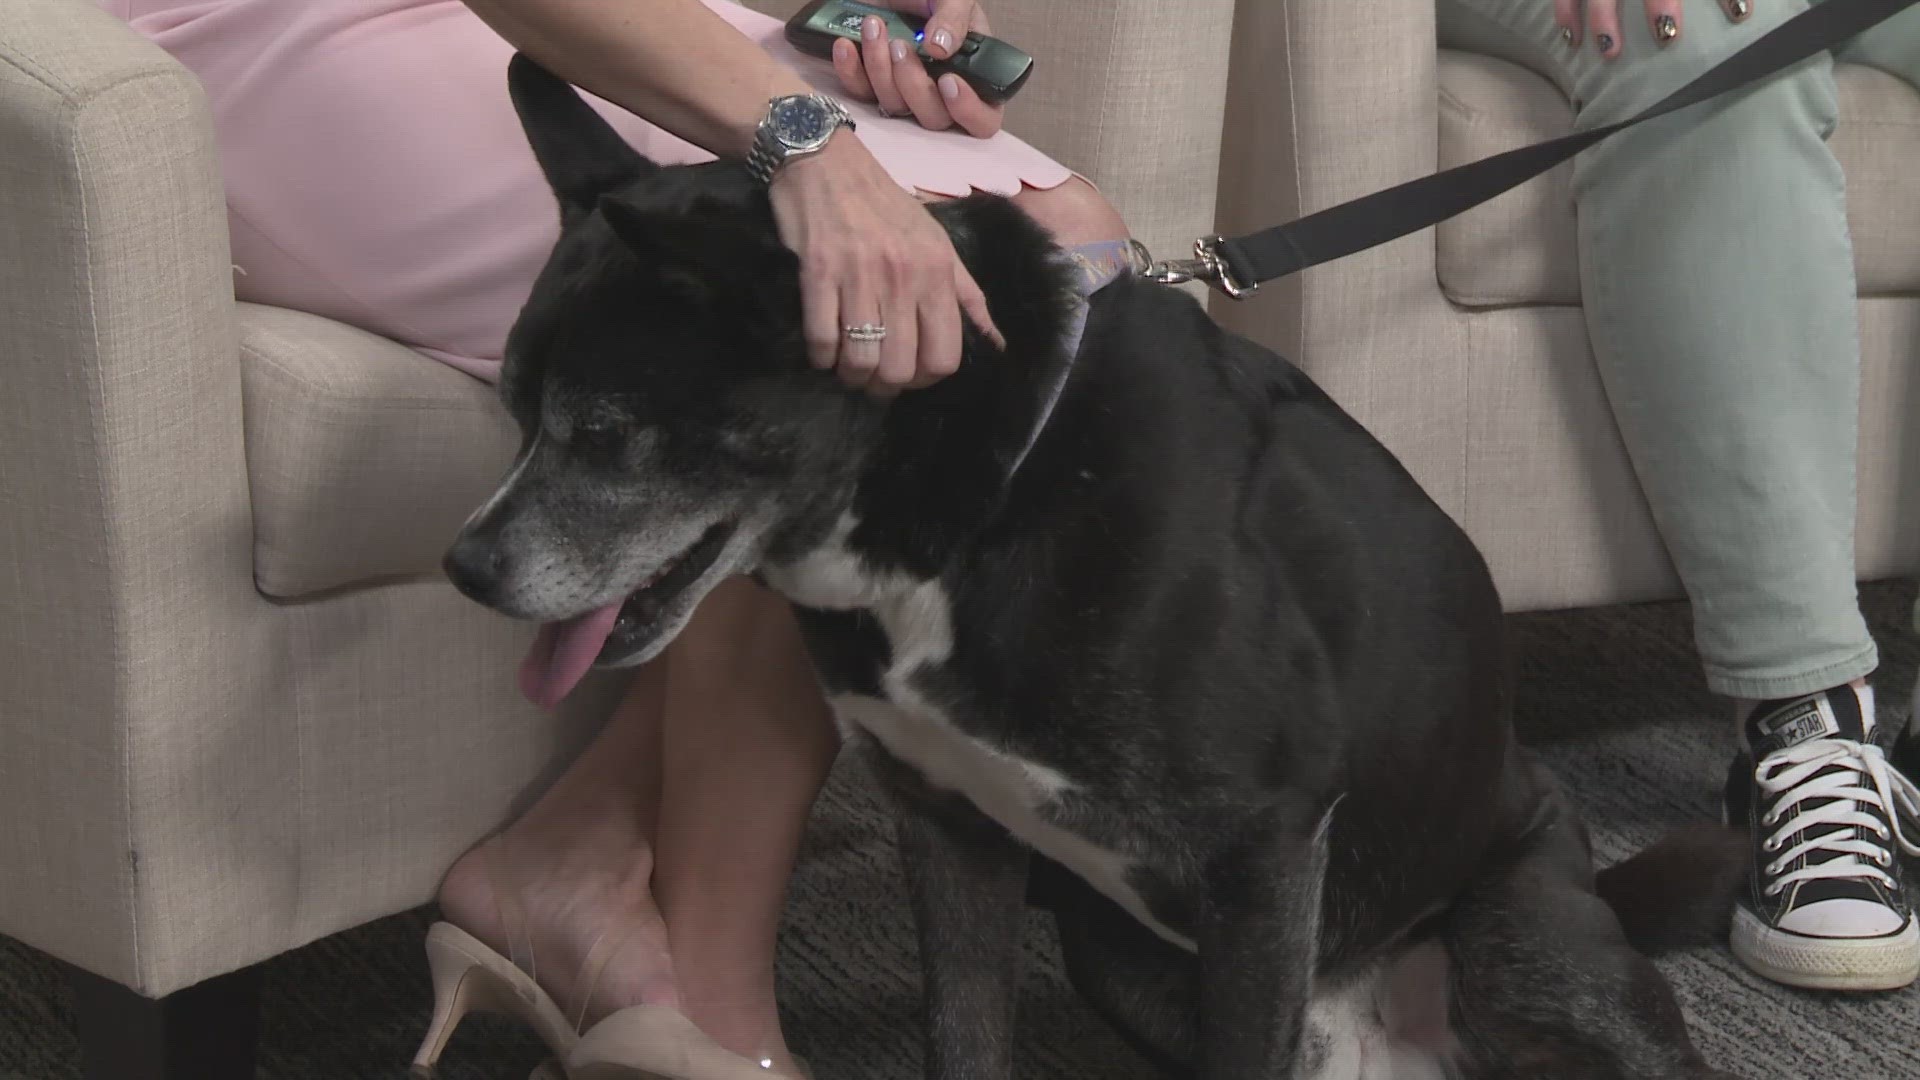 Every Friday on KVUE Midday, we introduce you to a new dog or cat in need of a fur-ever home.